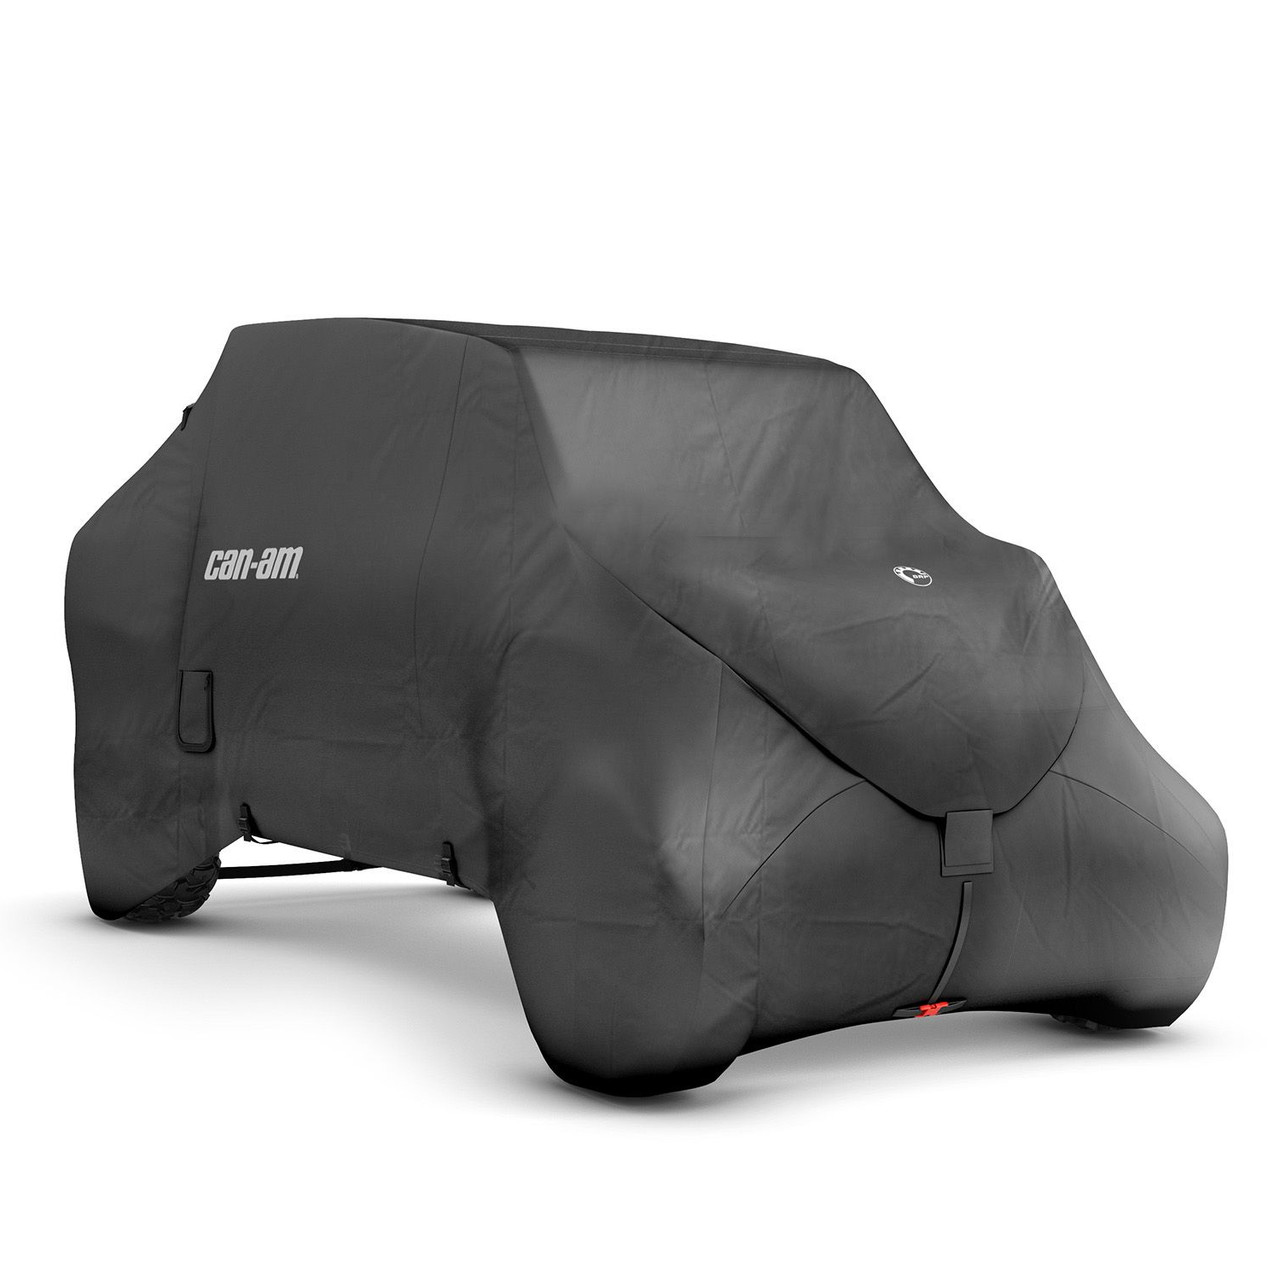 Can-Am New OEM, Heavy Duty UV & Weather Resistant Trailering Cover, 715006817